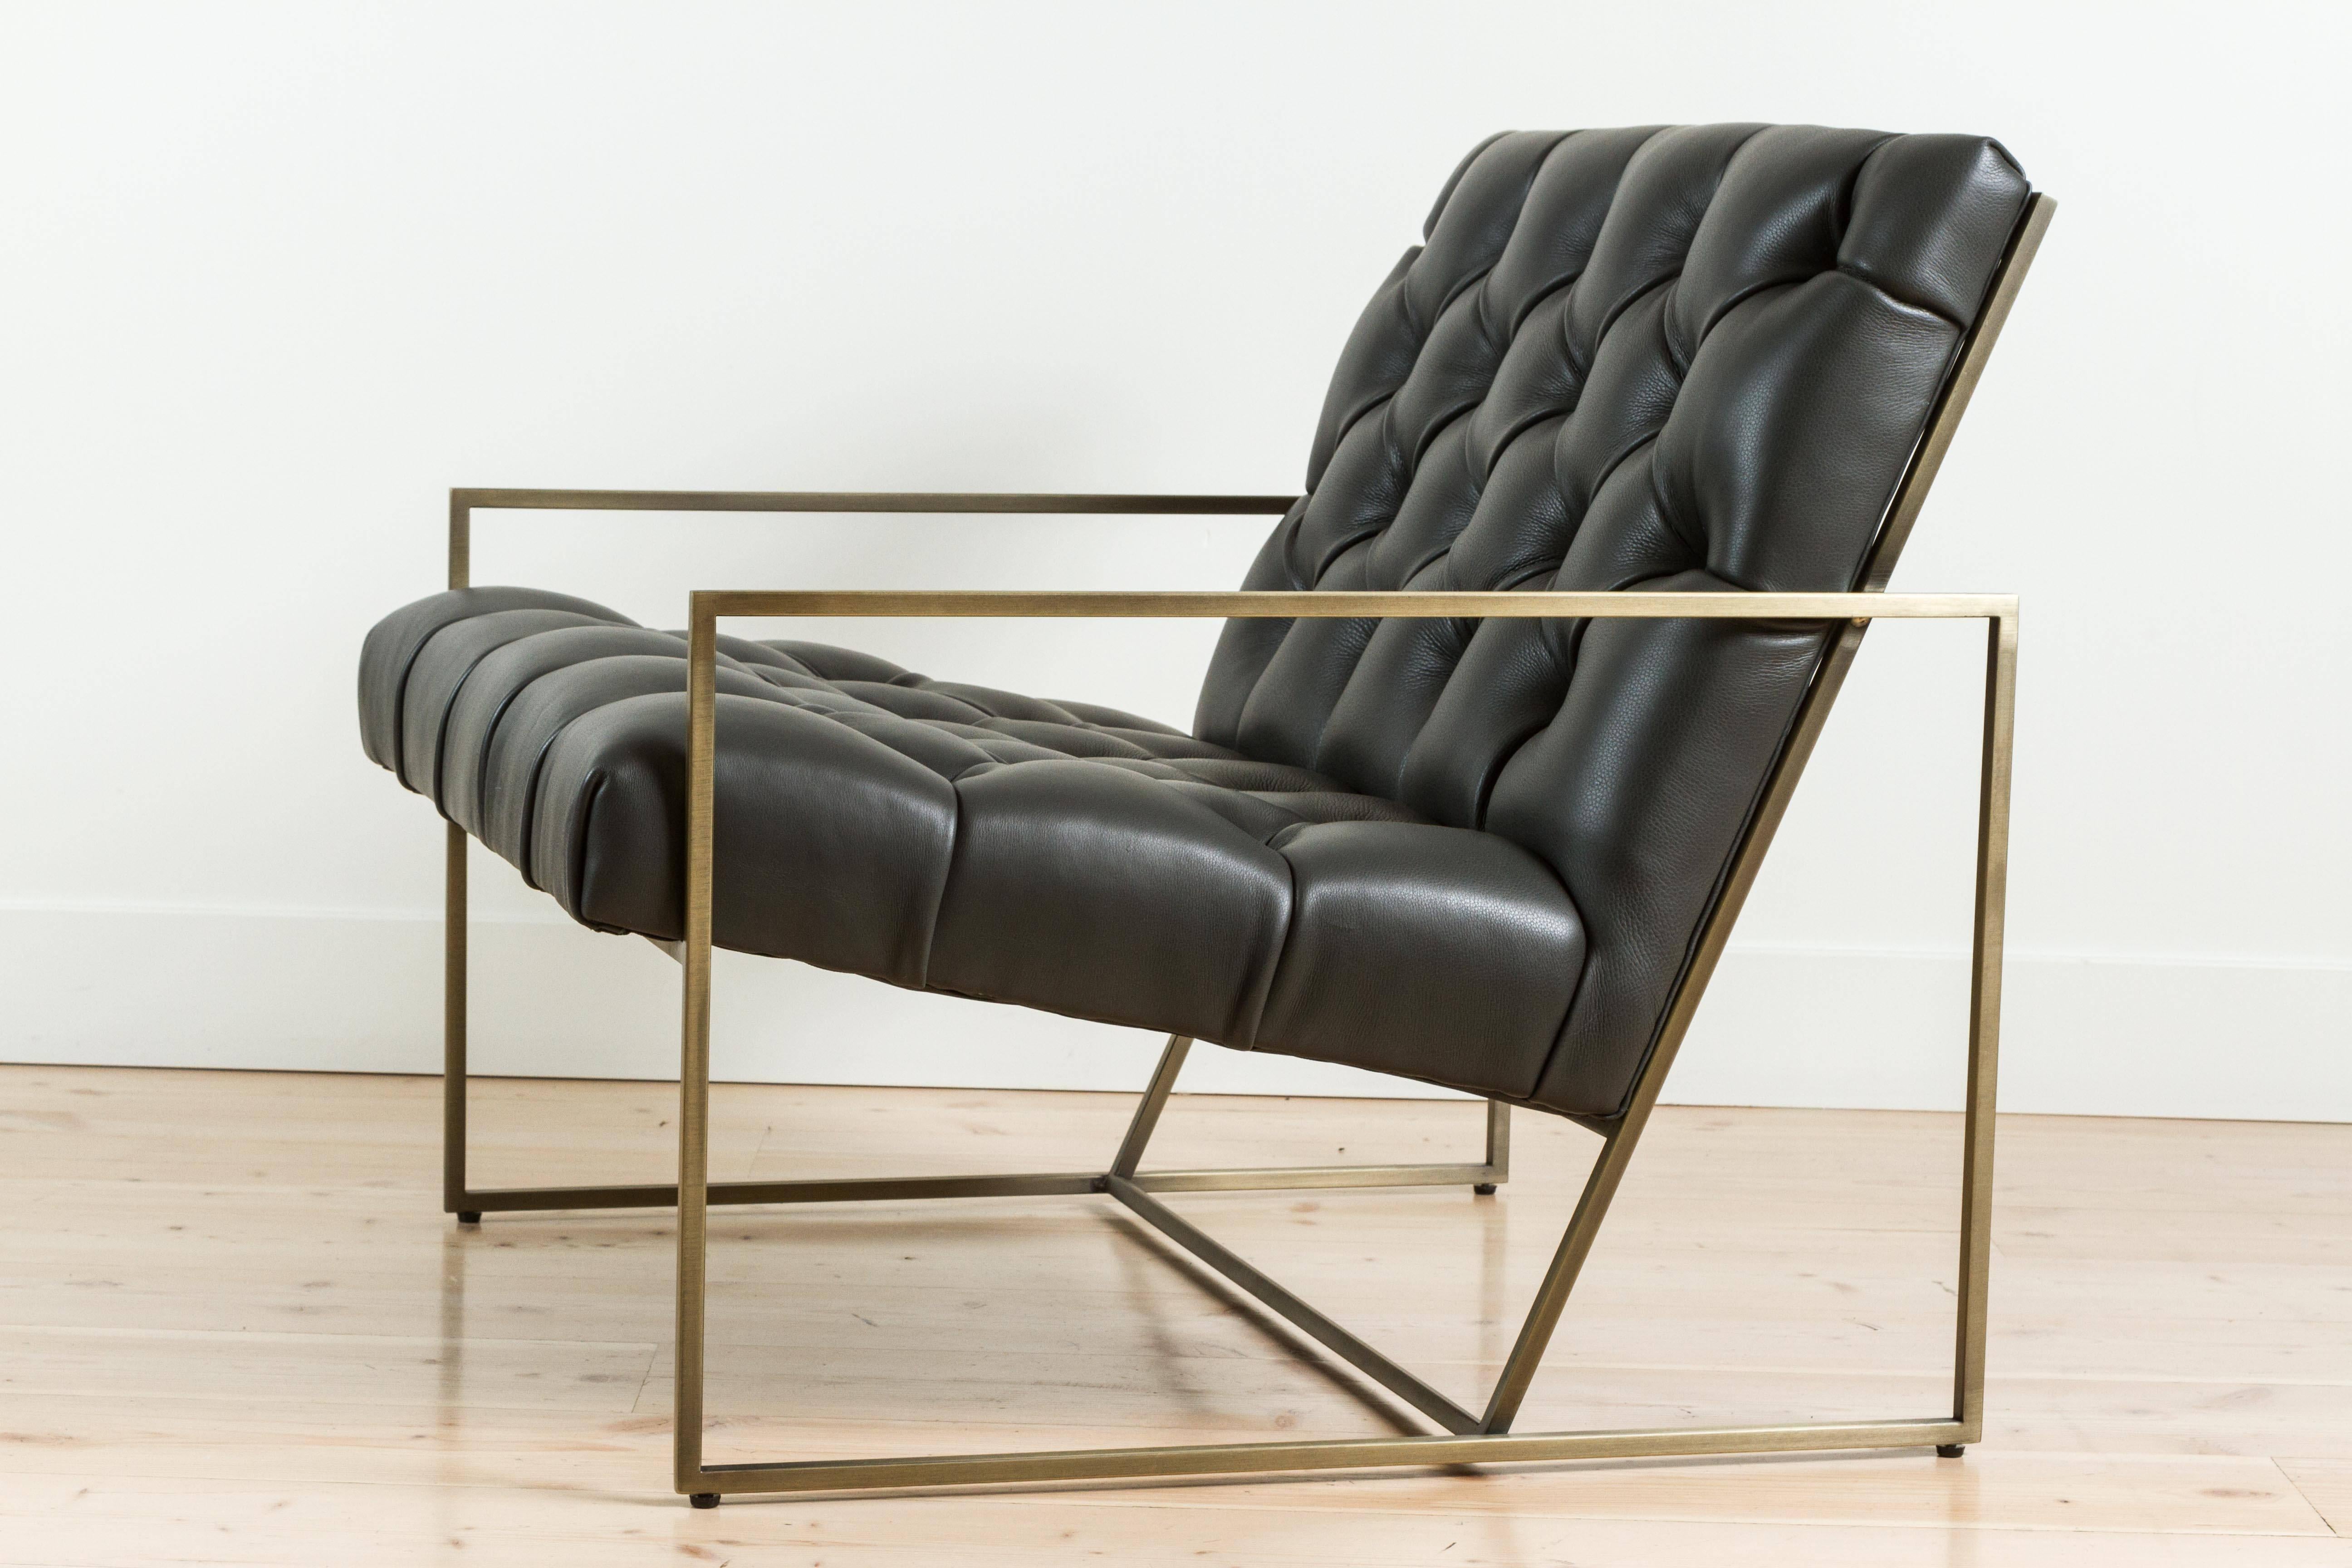 American Thin Frame Lounge Chair in Diamond Tufted Charcoal Leather by Lawson-Fenning